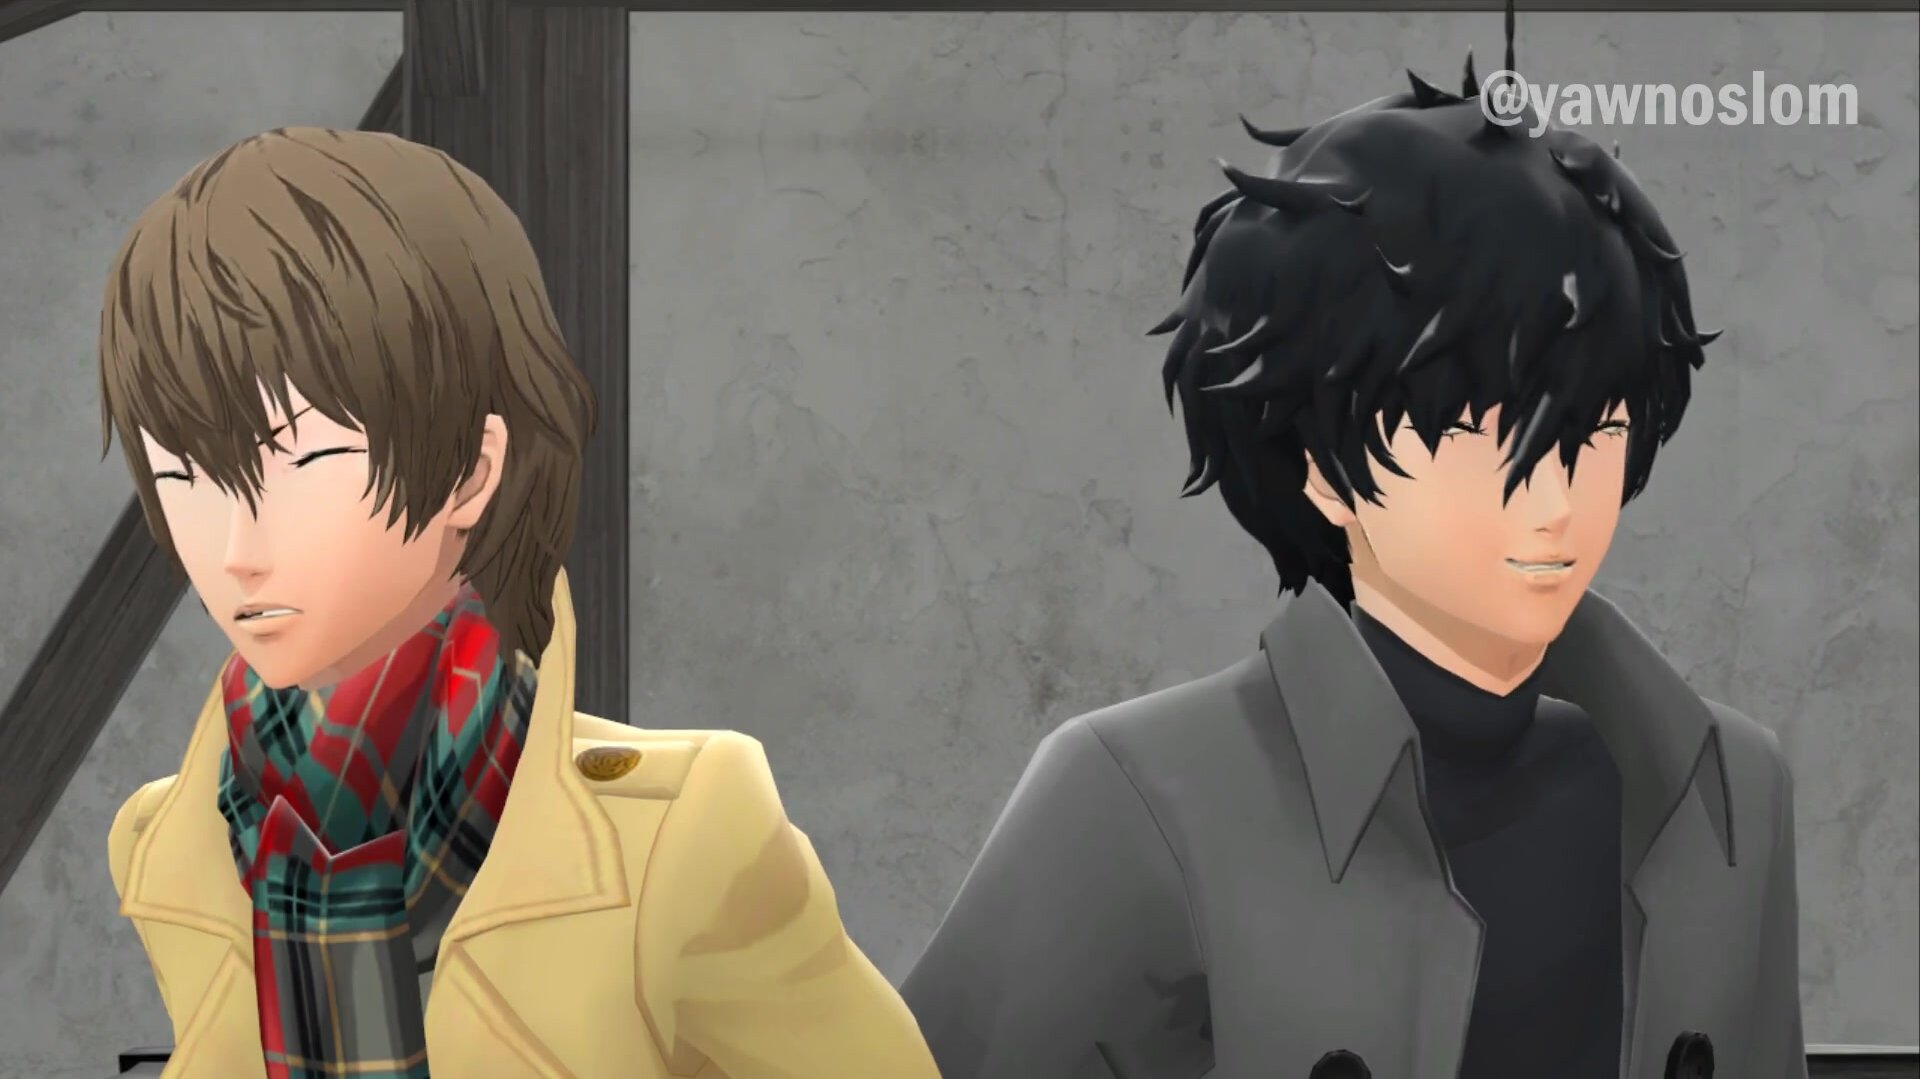 Akechi and Joker Farting Together